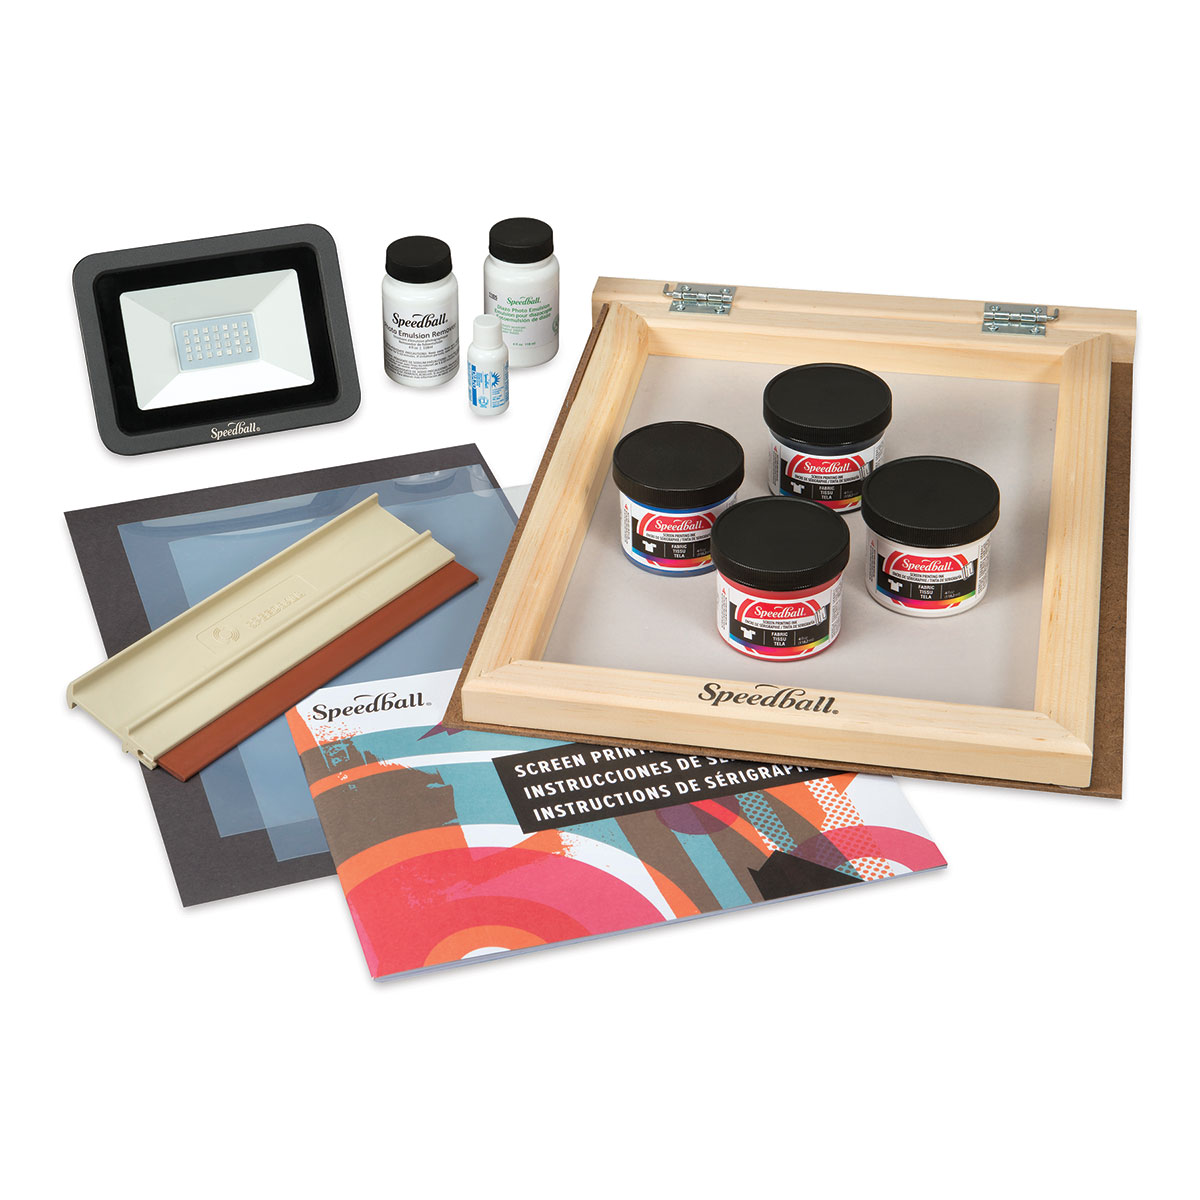 Tranquility præambel Uegnet Speedball Advanced All-In-One Fabric Screen Printing Kit | BLICK Art  Materials